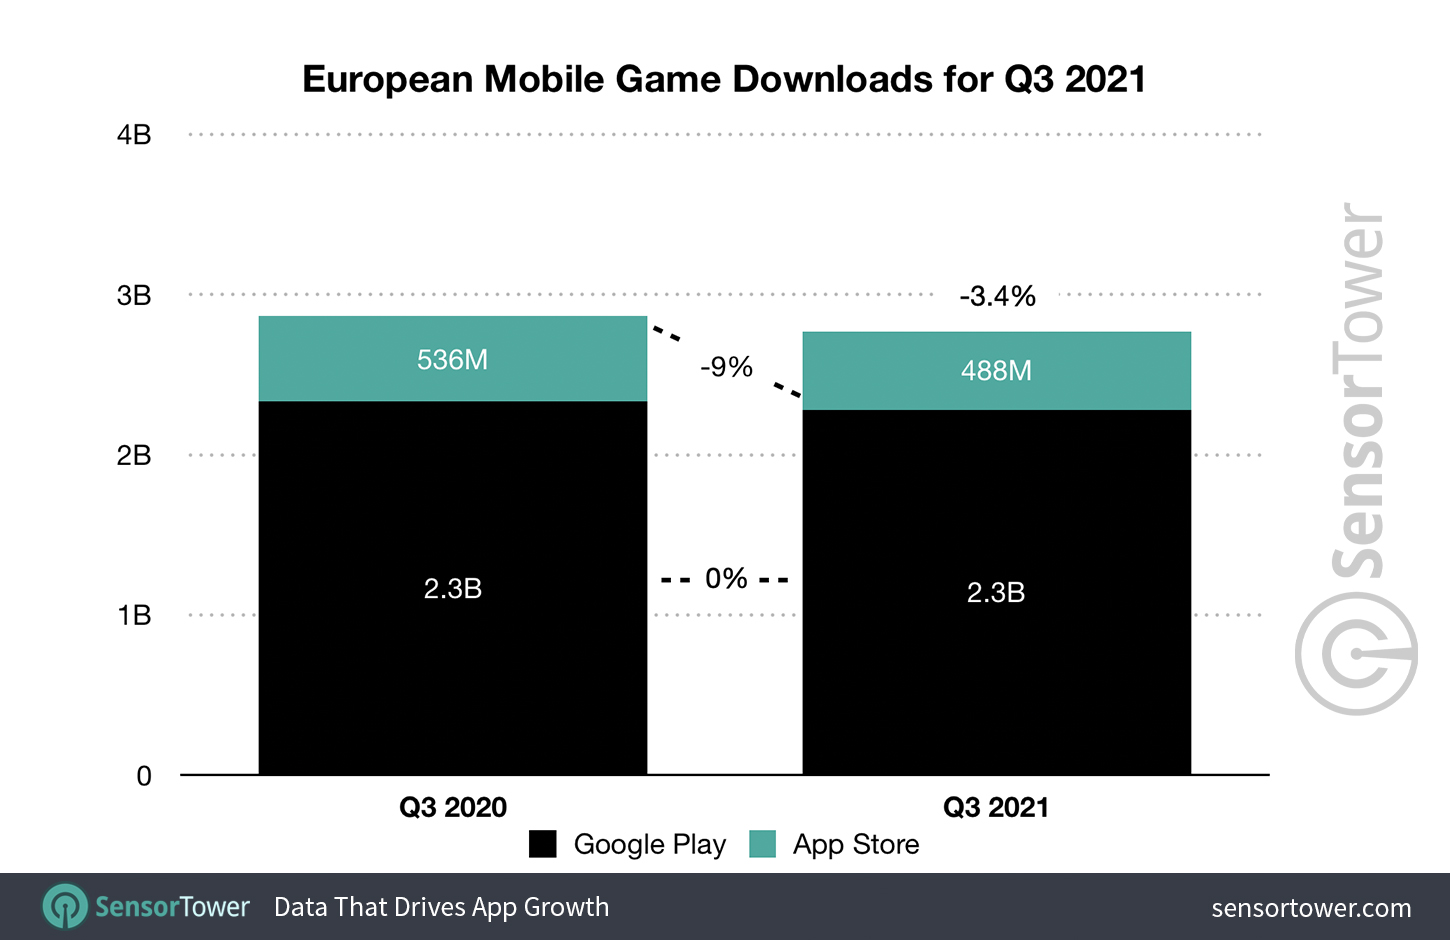 European Downloads of Mobile Games in Q3 2021